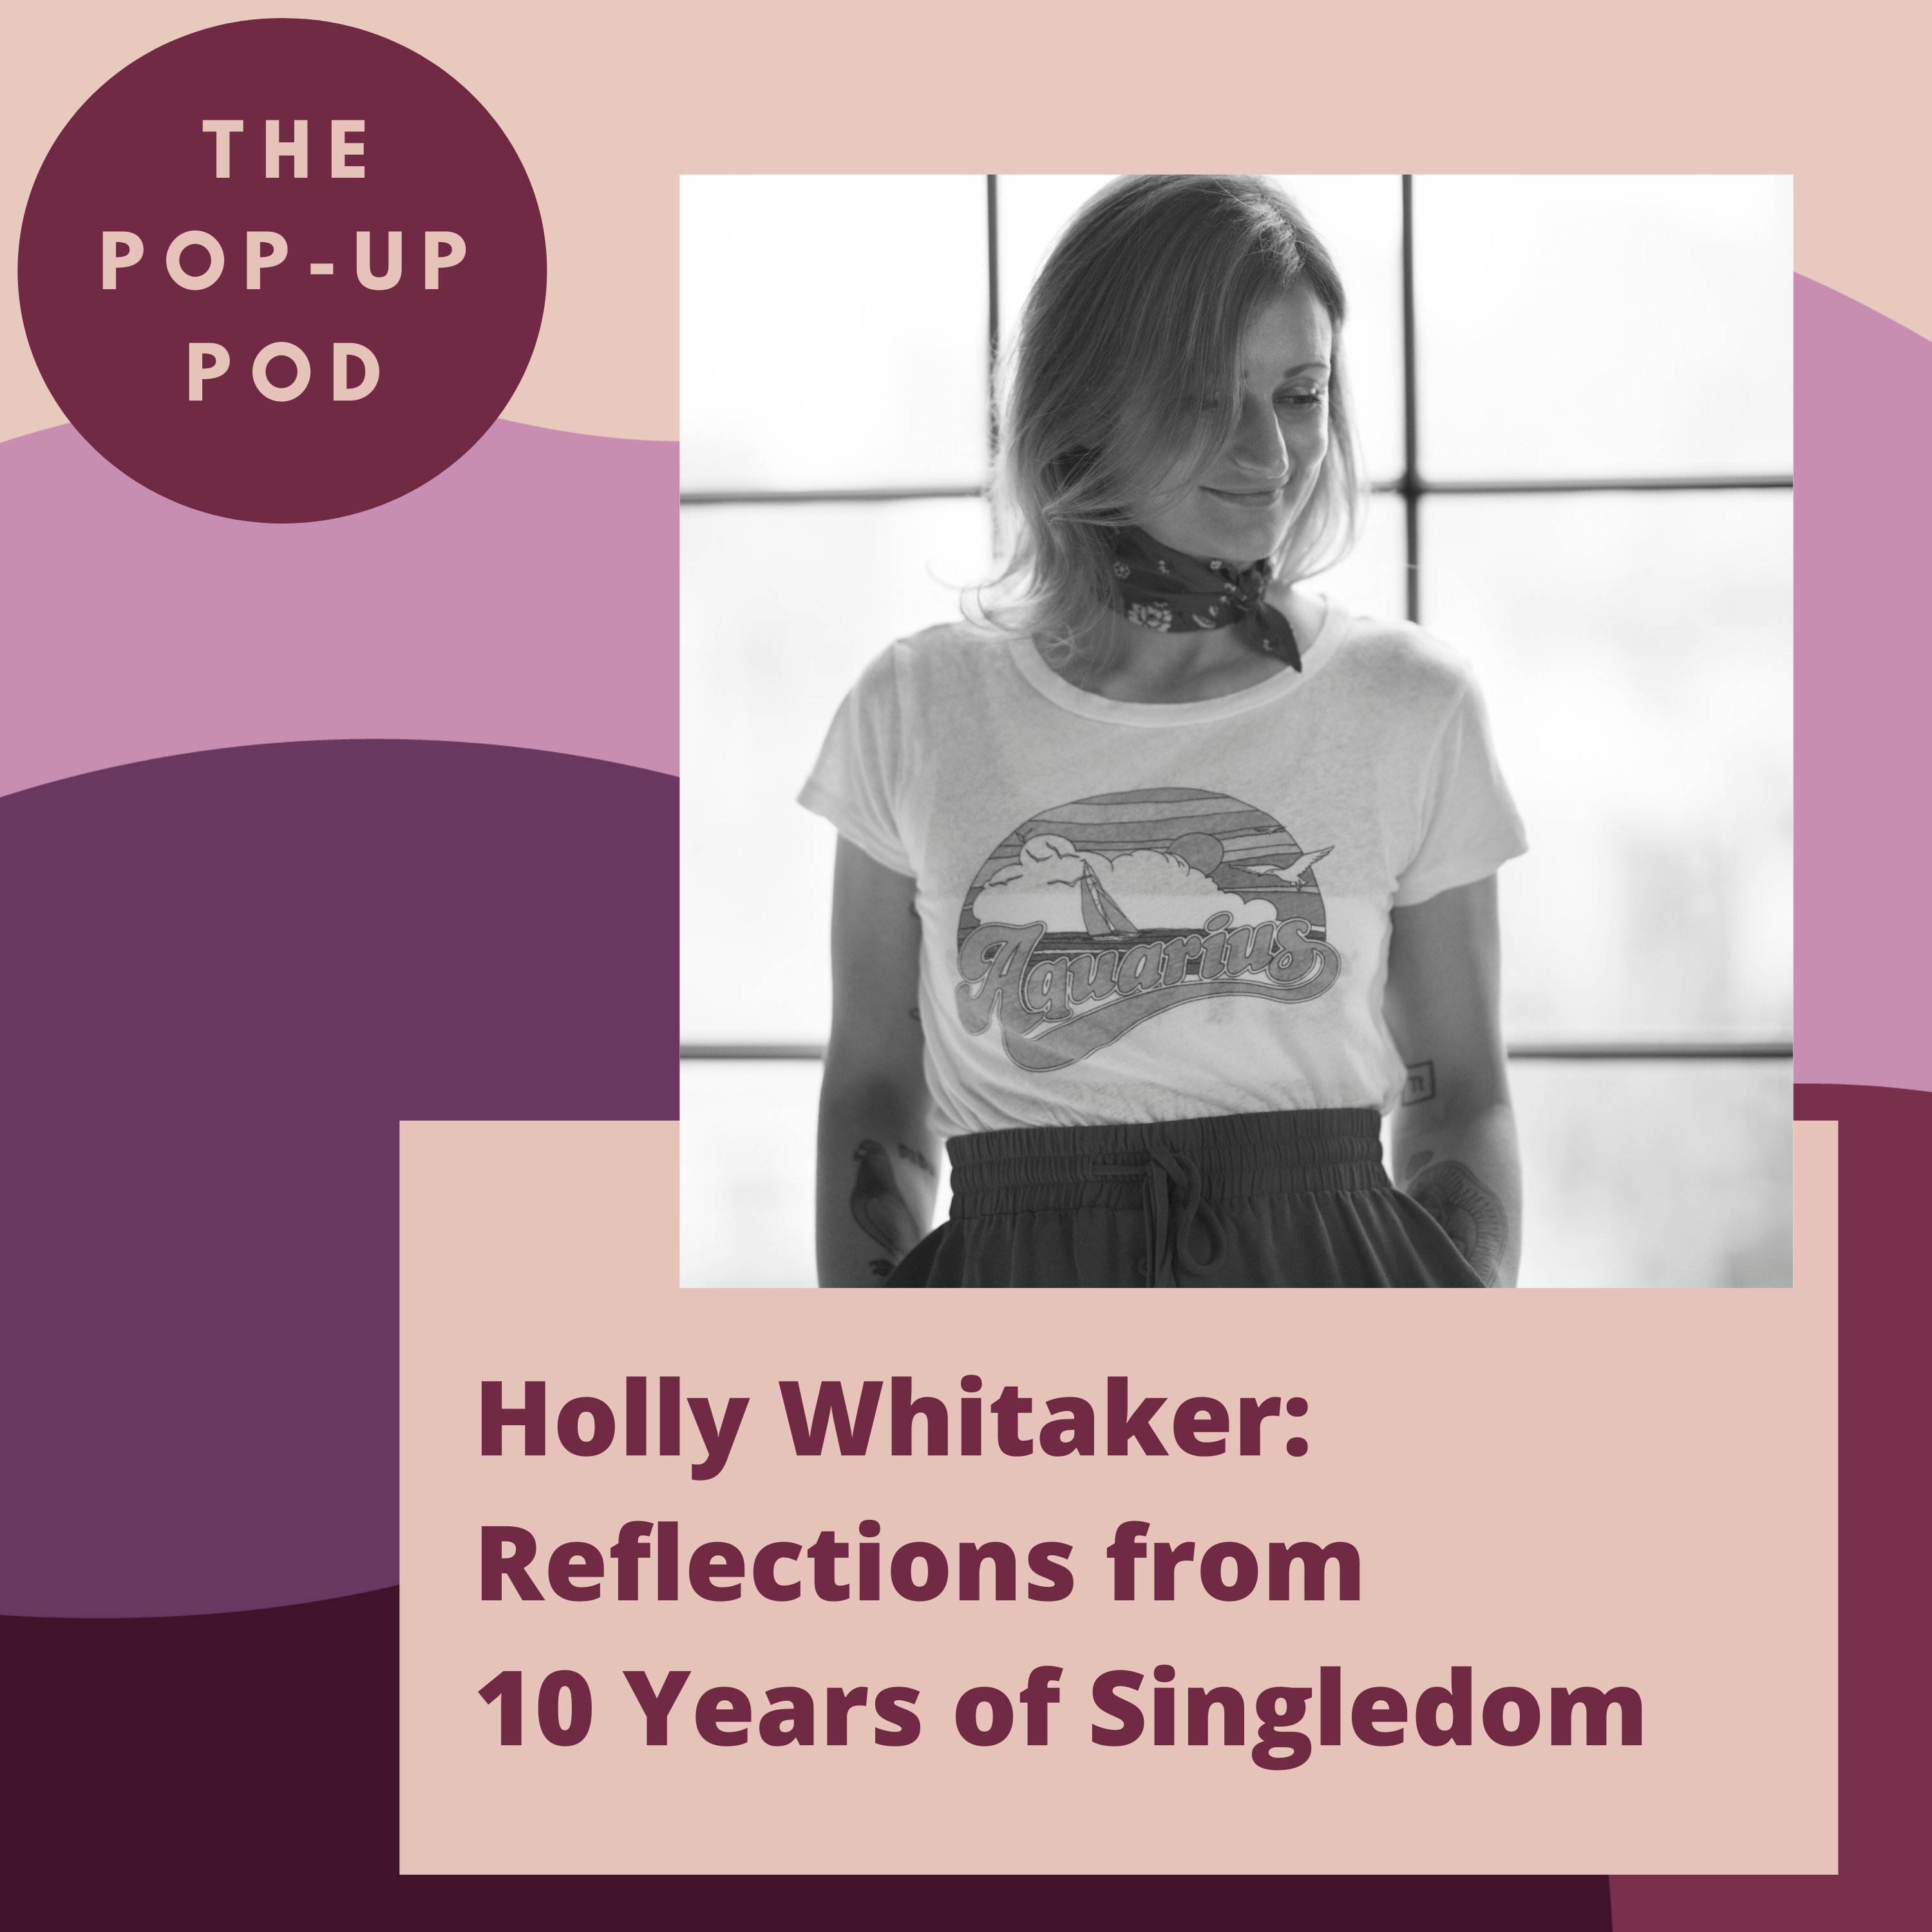 Holly Whitaker: Reflections from 10 Years of Singledom